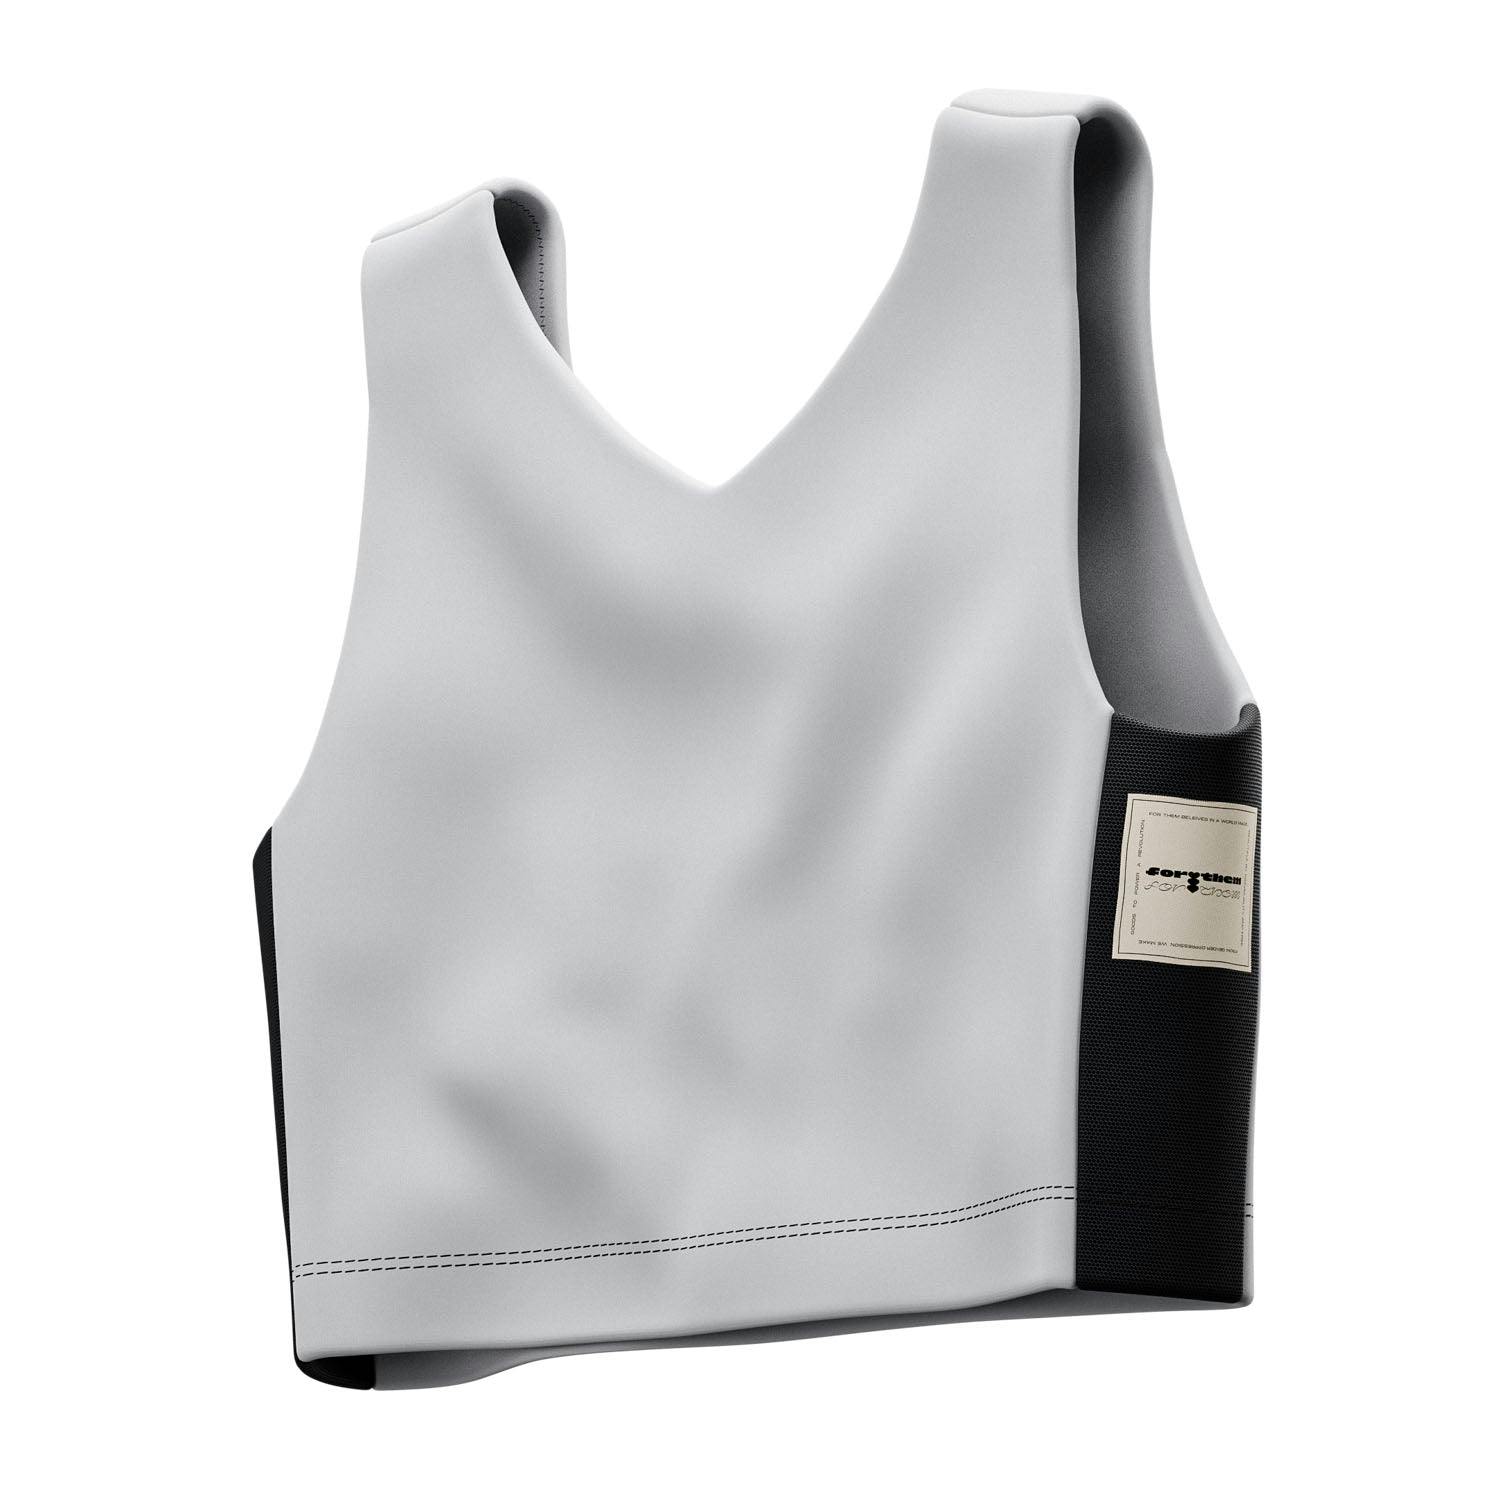 Chest Binder 2.0 for Max Compression & Comfort